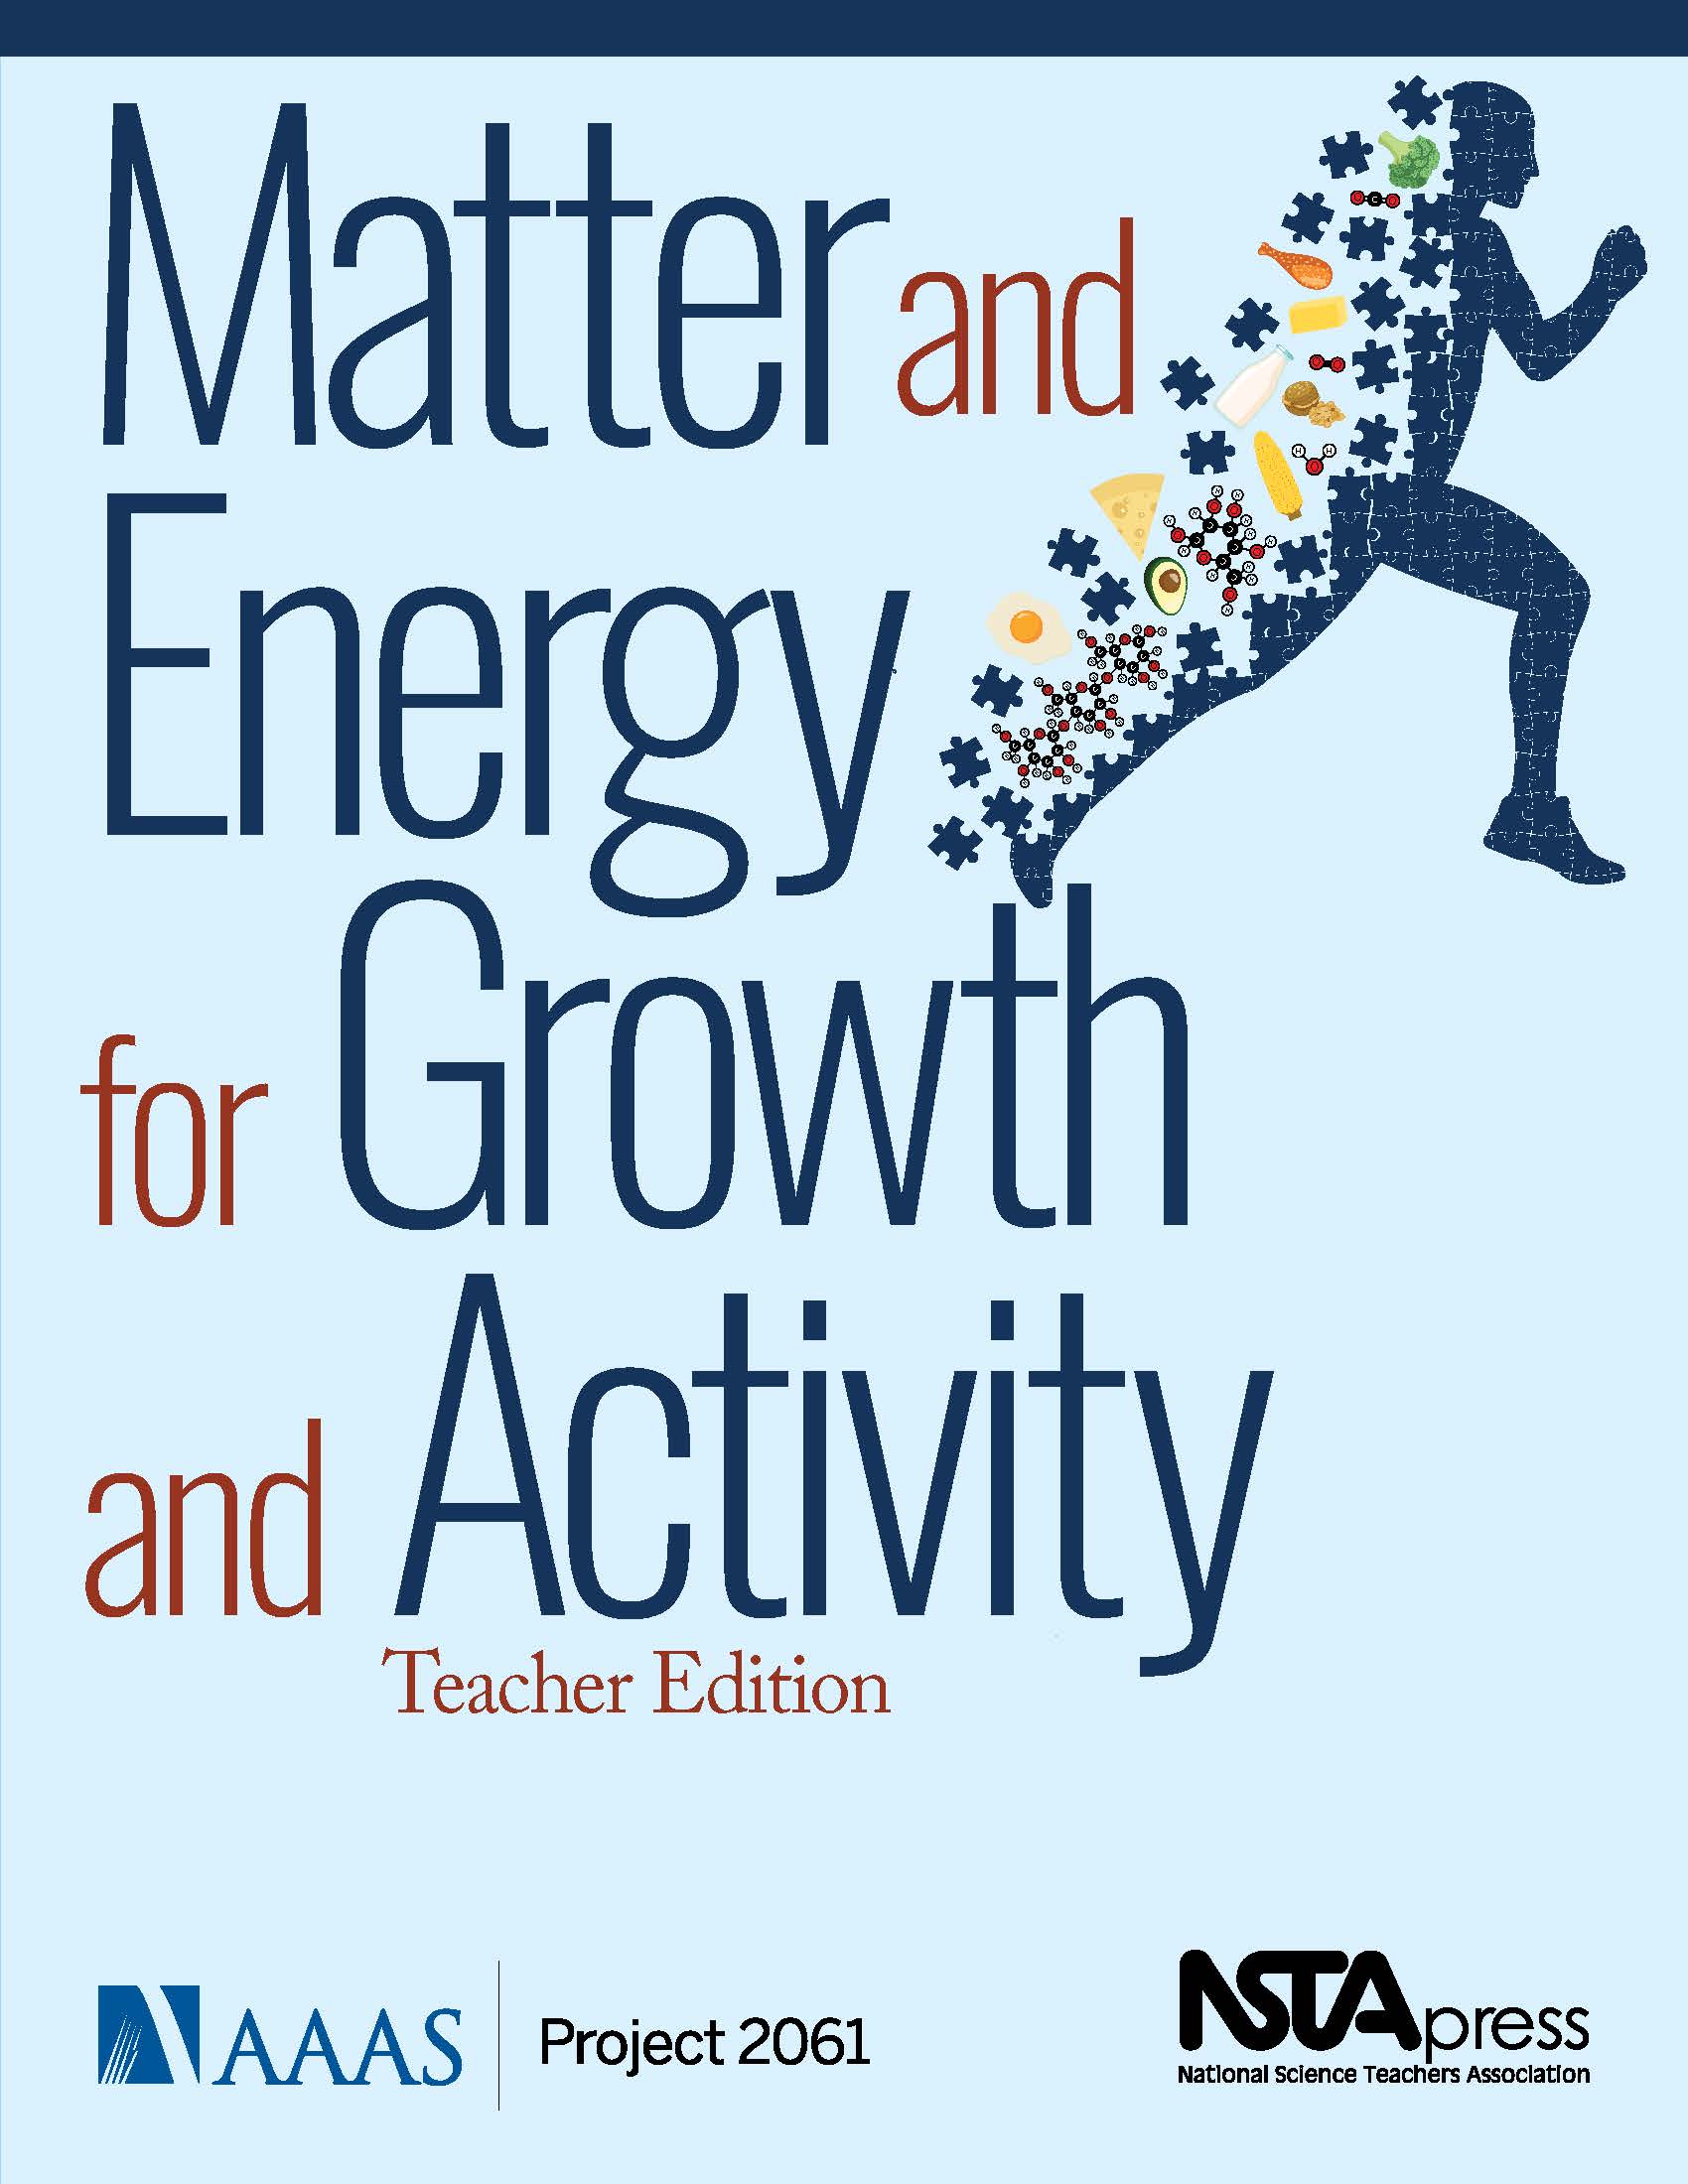 Cover of book "Matter and Energy for Growth and Activity, Teacher Edition"